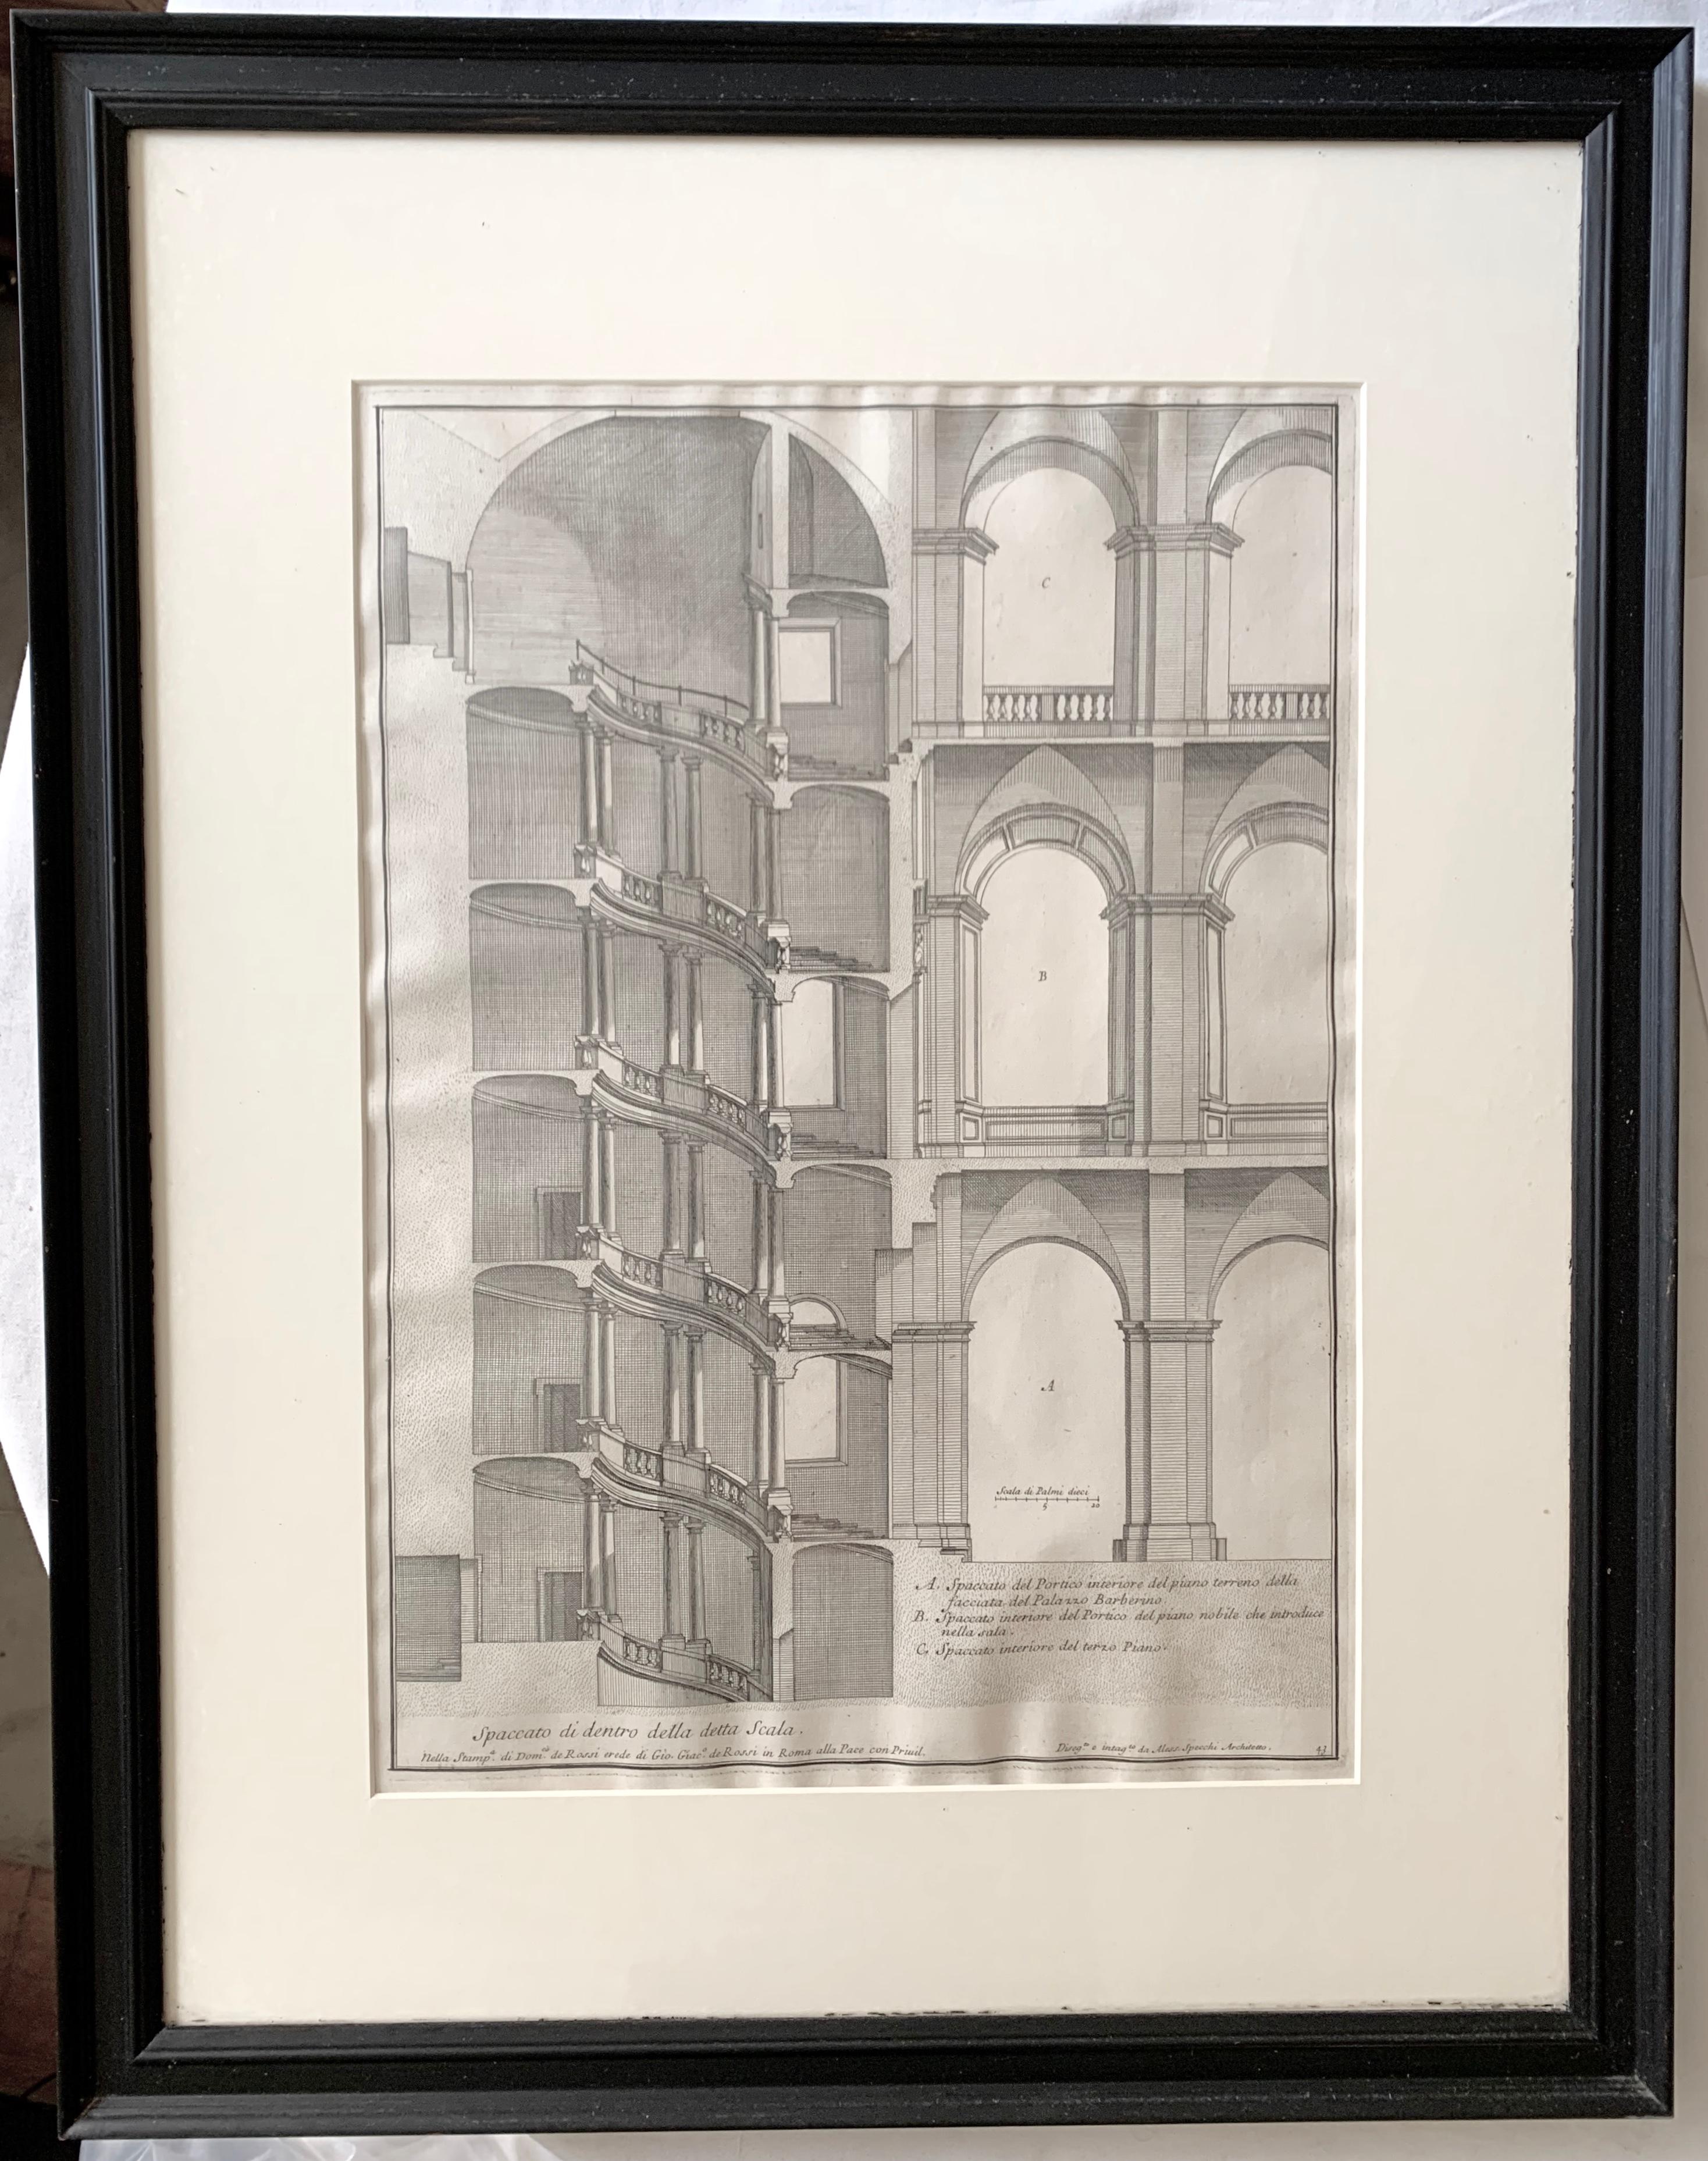 Pair of engravings of architectural studies by Alessandro Specchi. Pair of original engravings of architectural studies in black painted frames of the staircase in Palazzo Barberini, Rome. Staircase designed by Gianlorenzo Bernini (1598-1680),